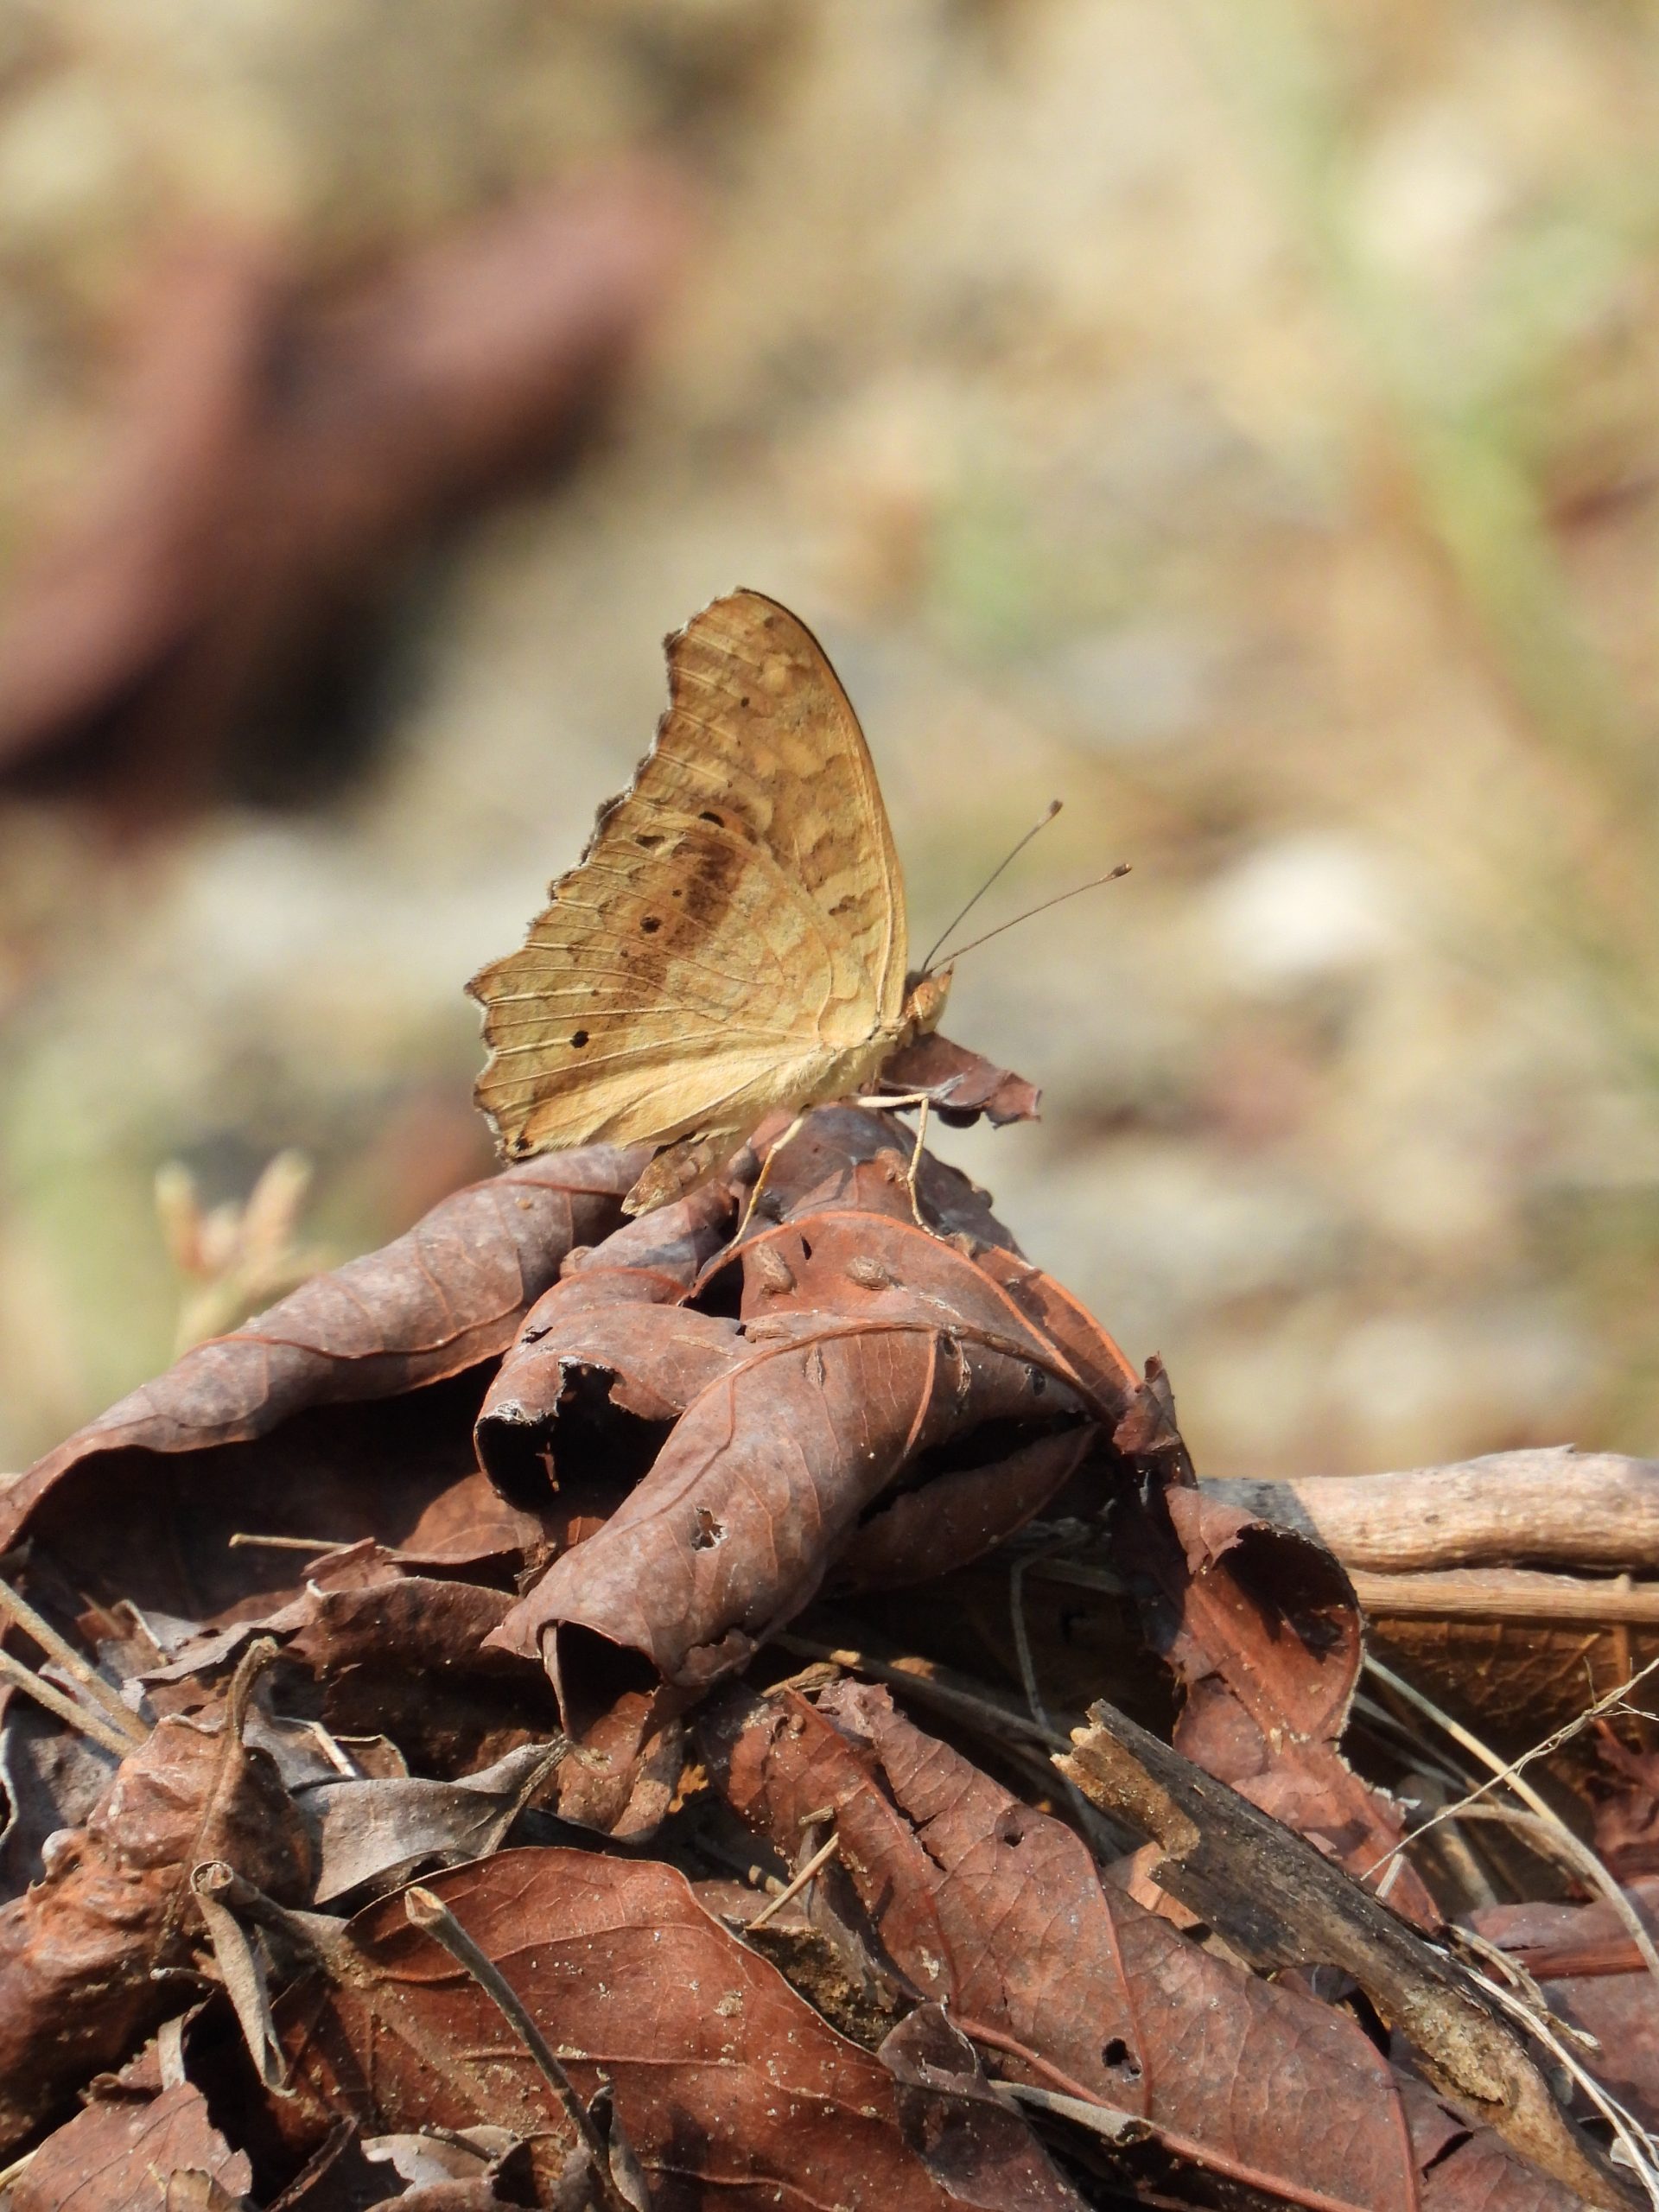 A butterfly on dry leaves